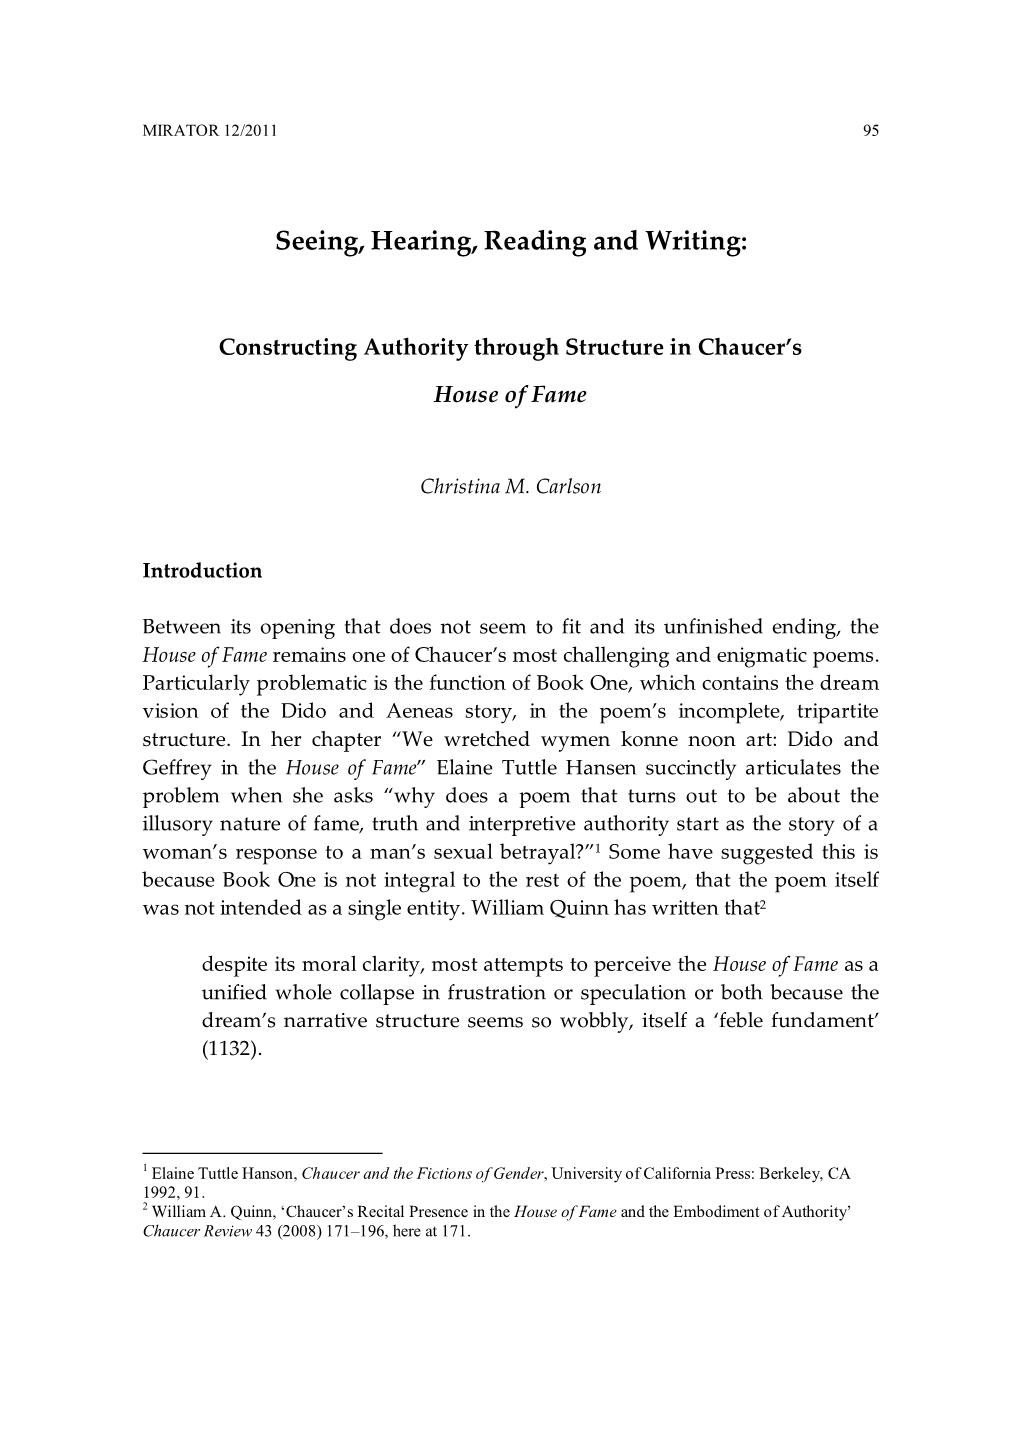 Seeing, Hearing, Reading and Writing